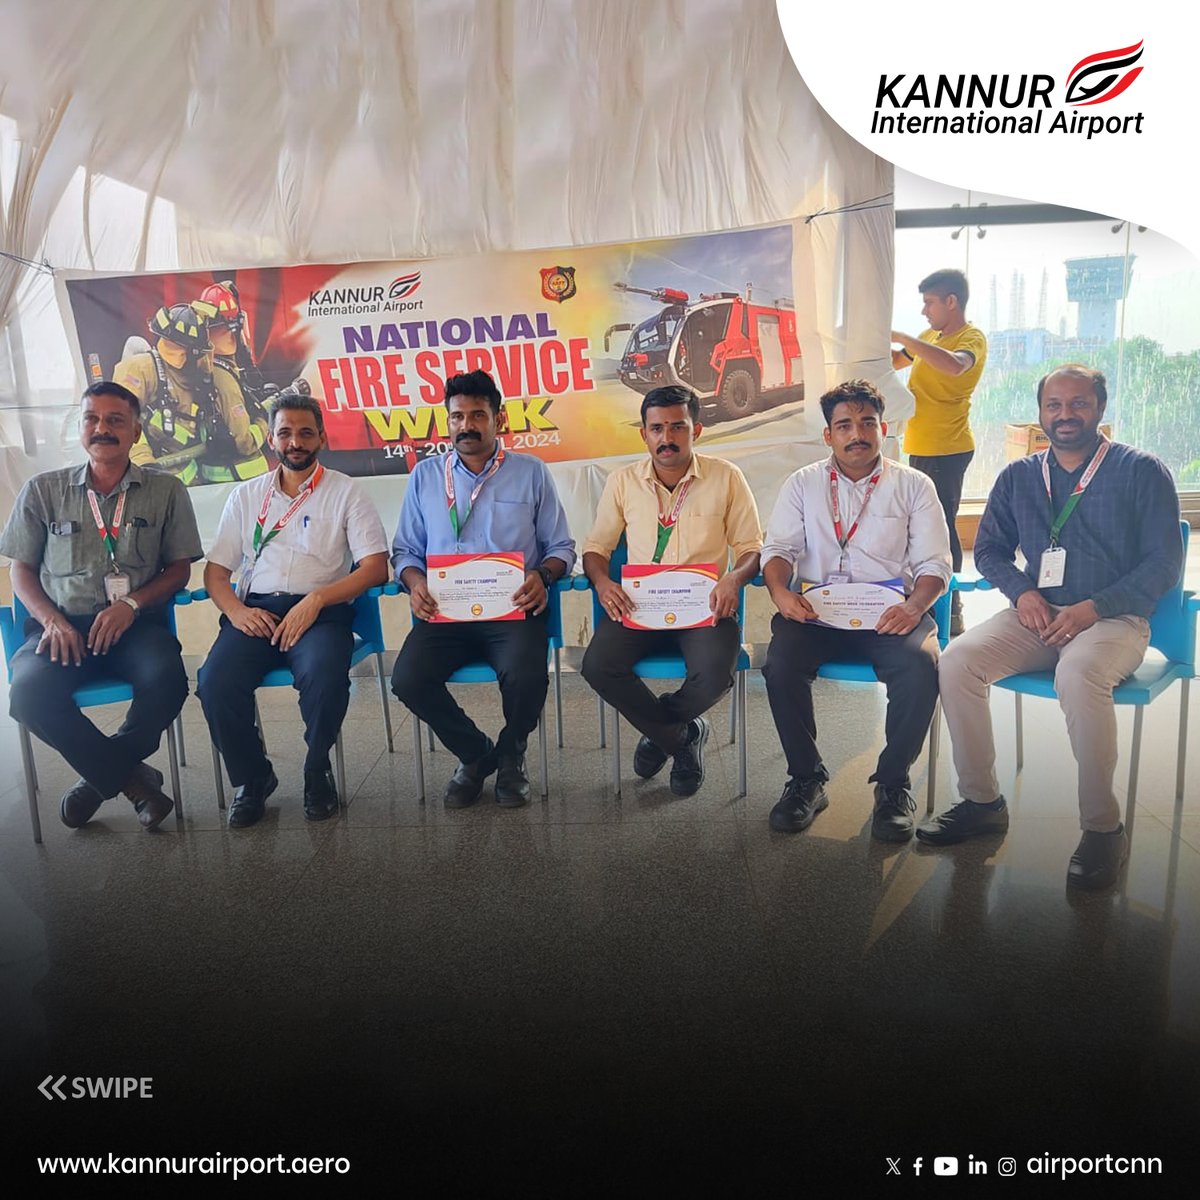 Closing ceremony of National Fire Service Week celebrations at Kannur International Airport Limited

#kannurinternationalairport #fireserviceweek #flywithkial #KIAL #kannur